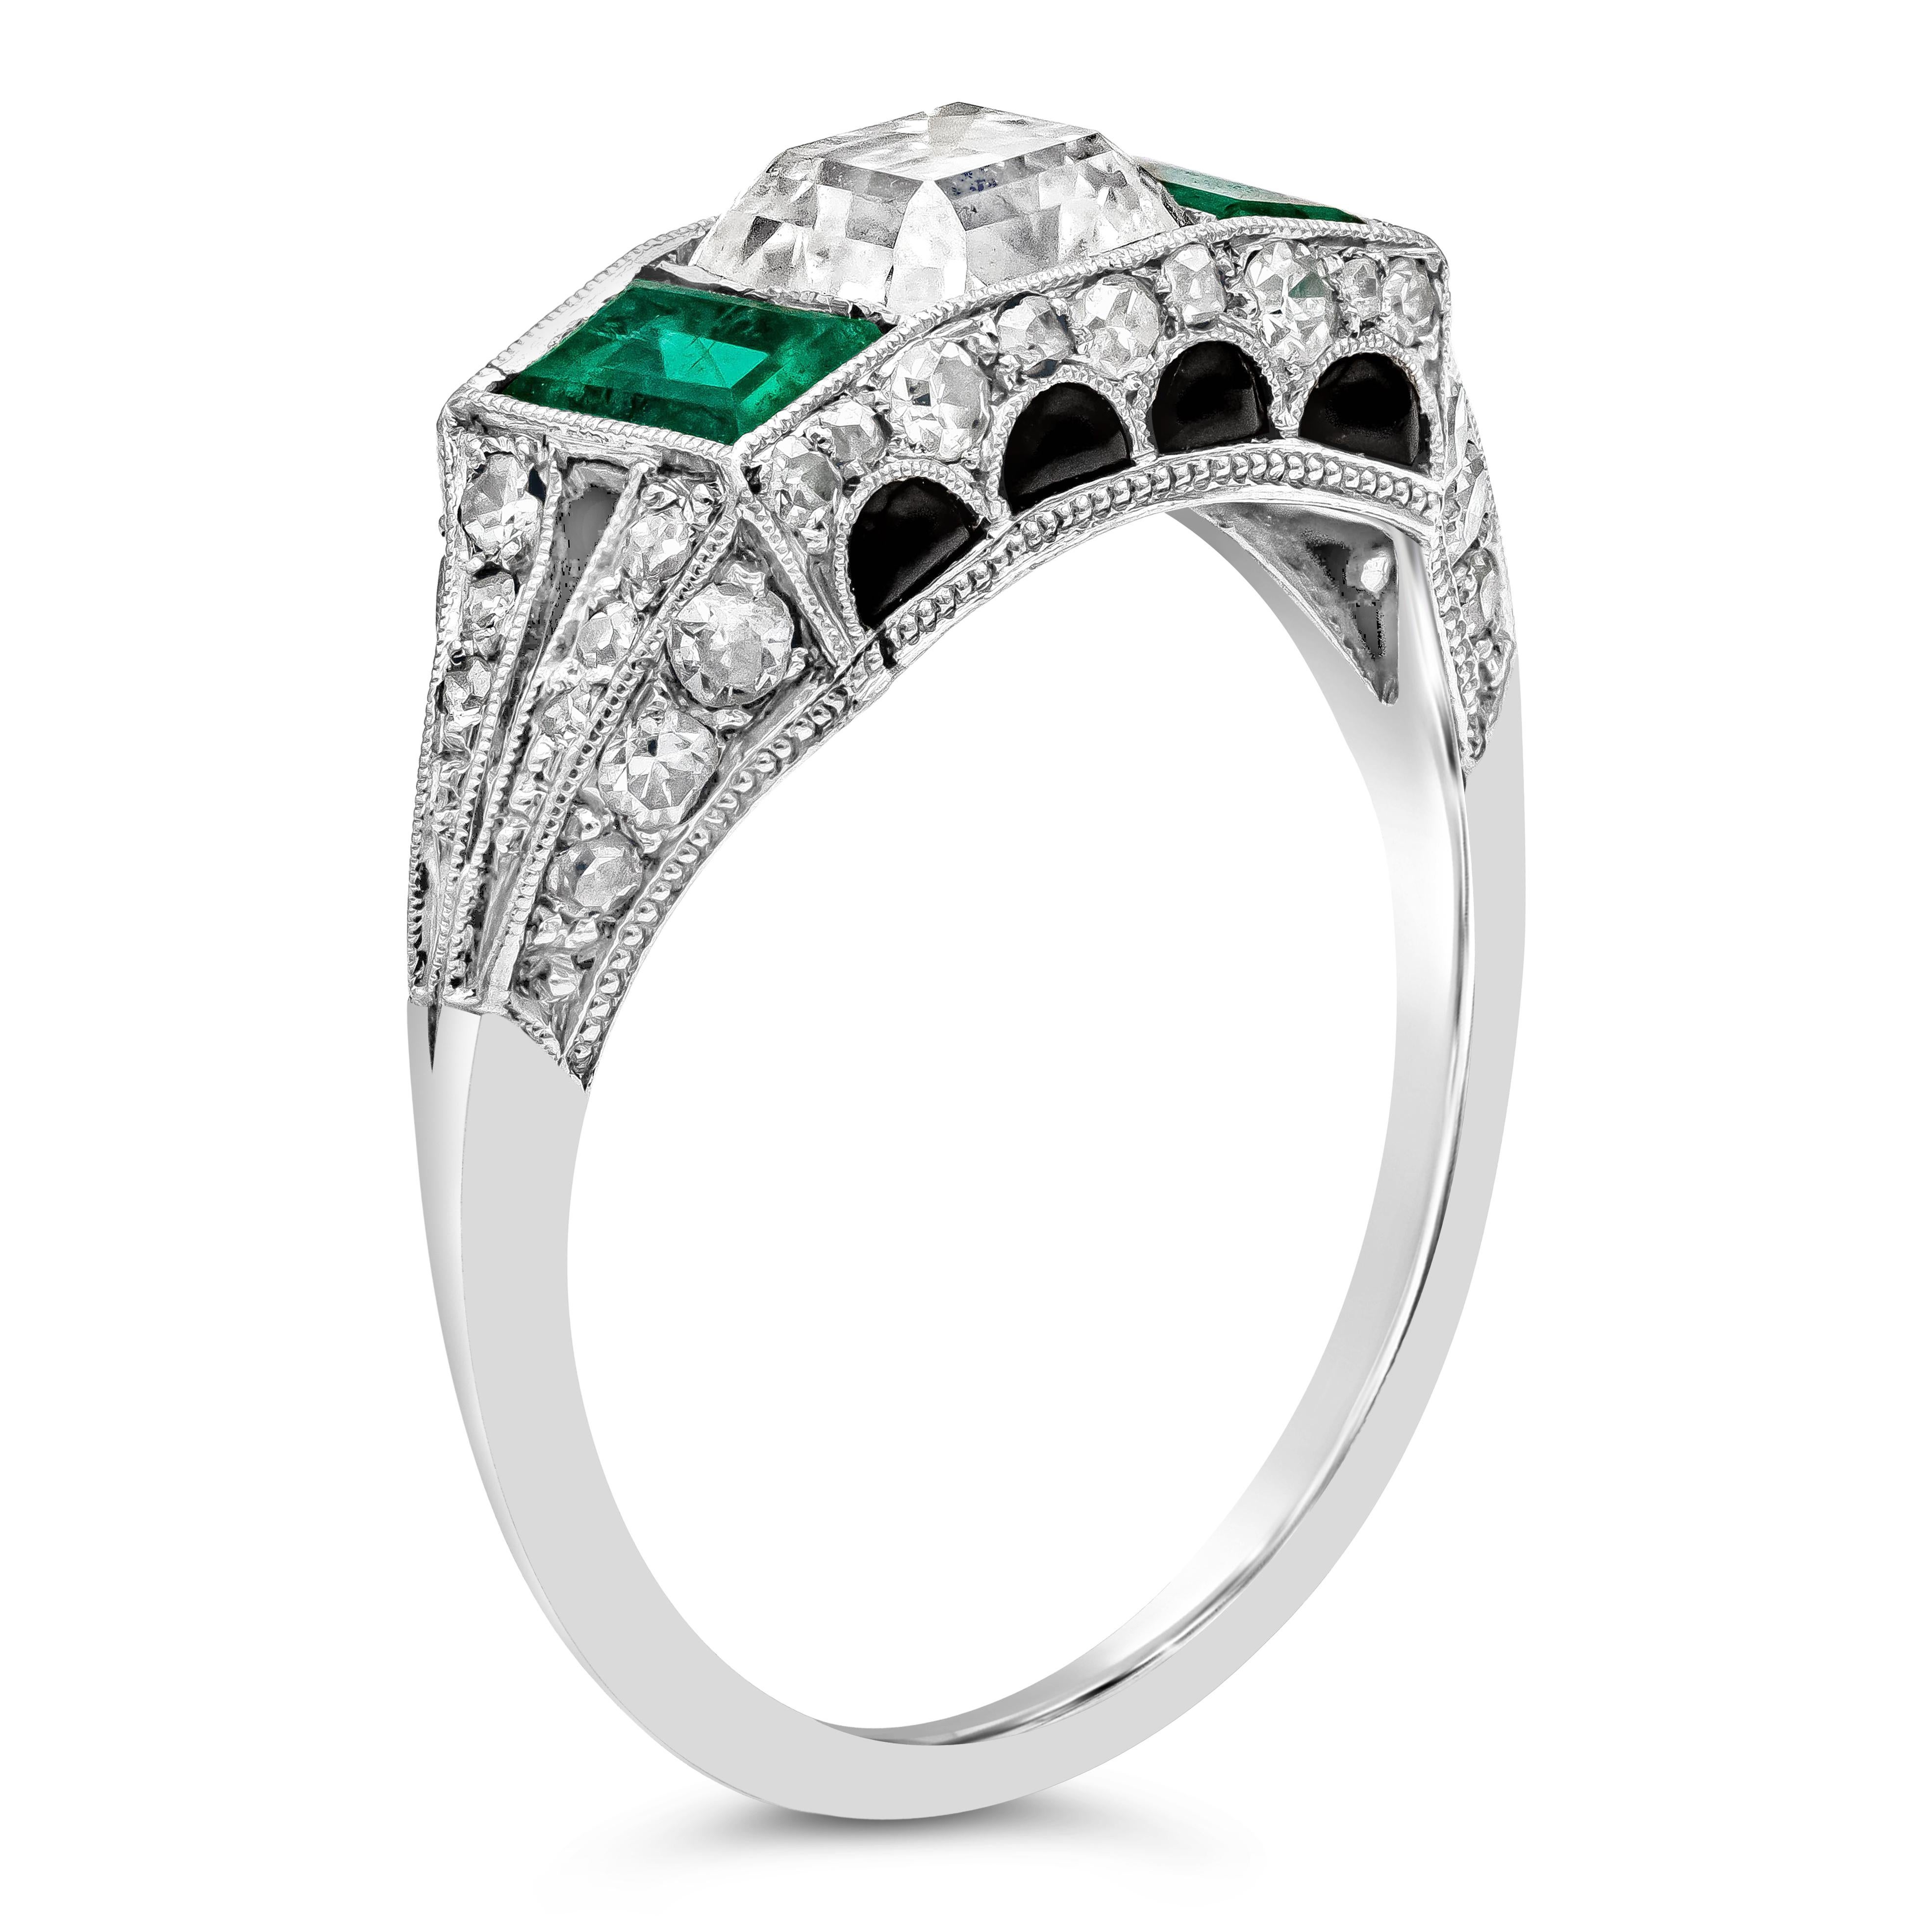 Mixed Cut 1.00 Carats Asscher Cut Diamond, Emerald and Onyx Antique Engagement Ring For Sale